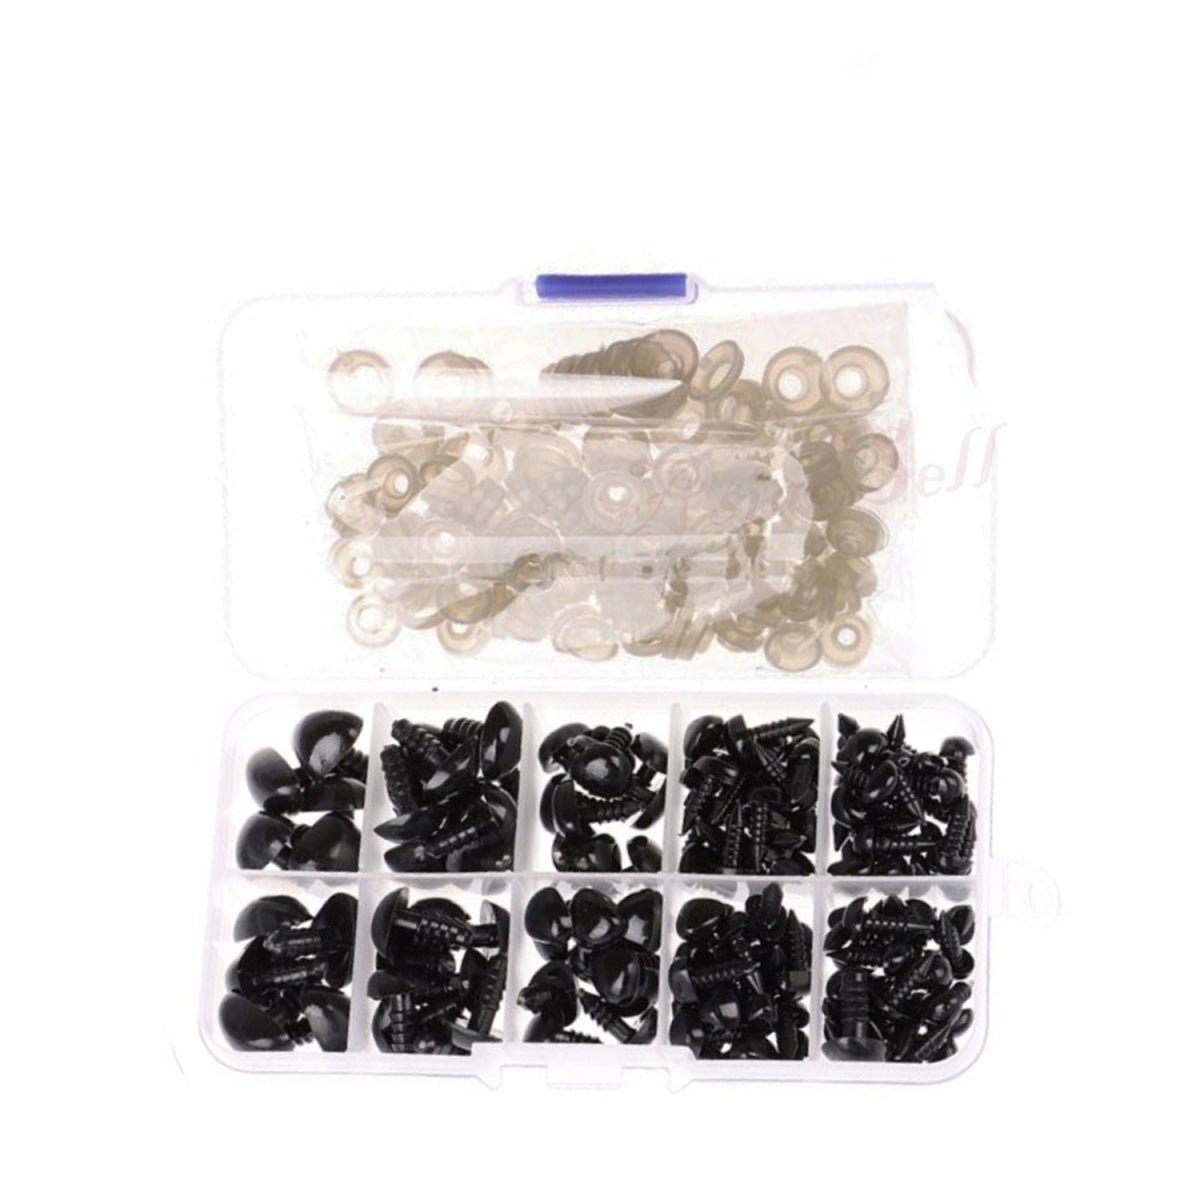 130pcs Set Plastic Toy Noses Triangle Nose Black Brown Pink Screw Backing Bear Puppet Dolls Toy - Black only - - Asia Sell